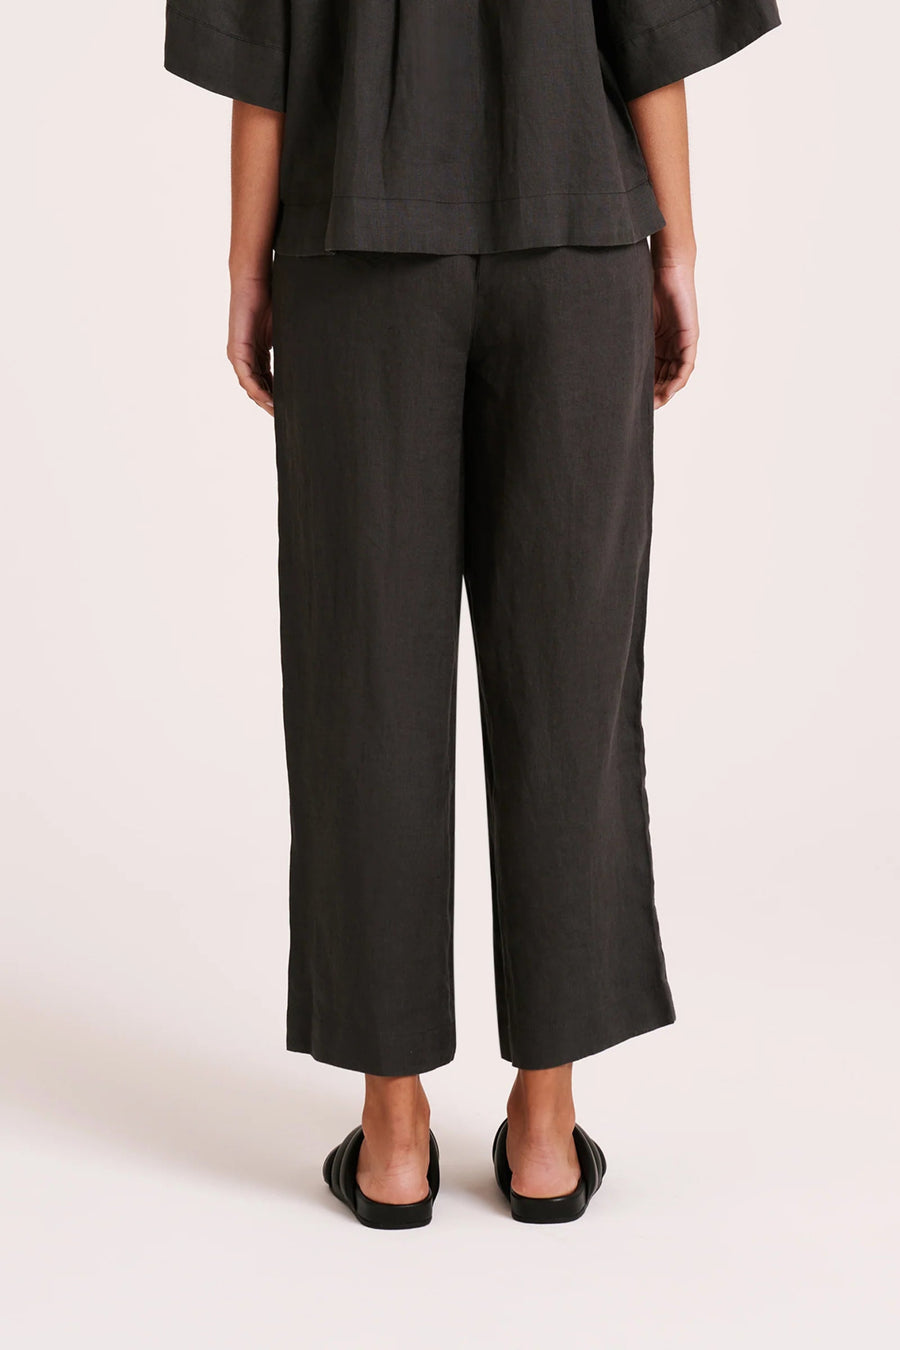 Lounge Linen Crop Pant - Kohl and Soda